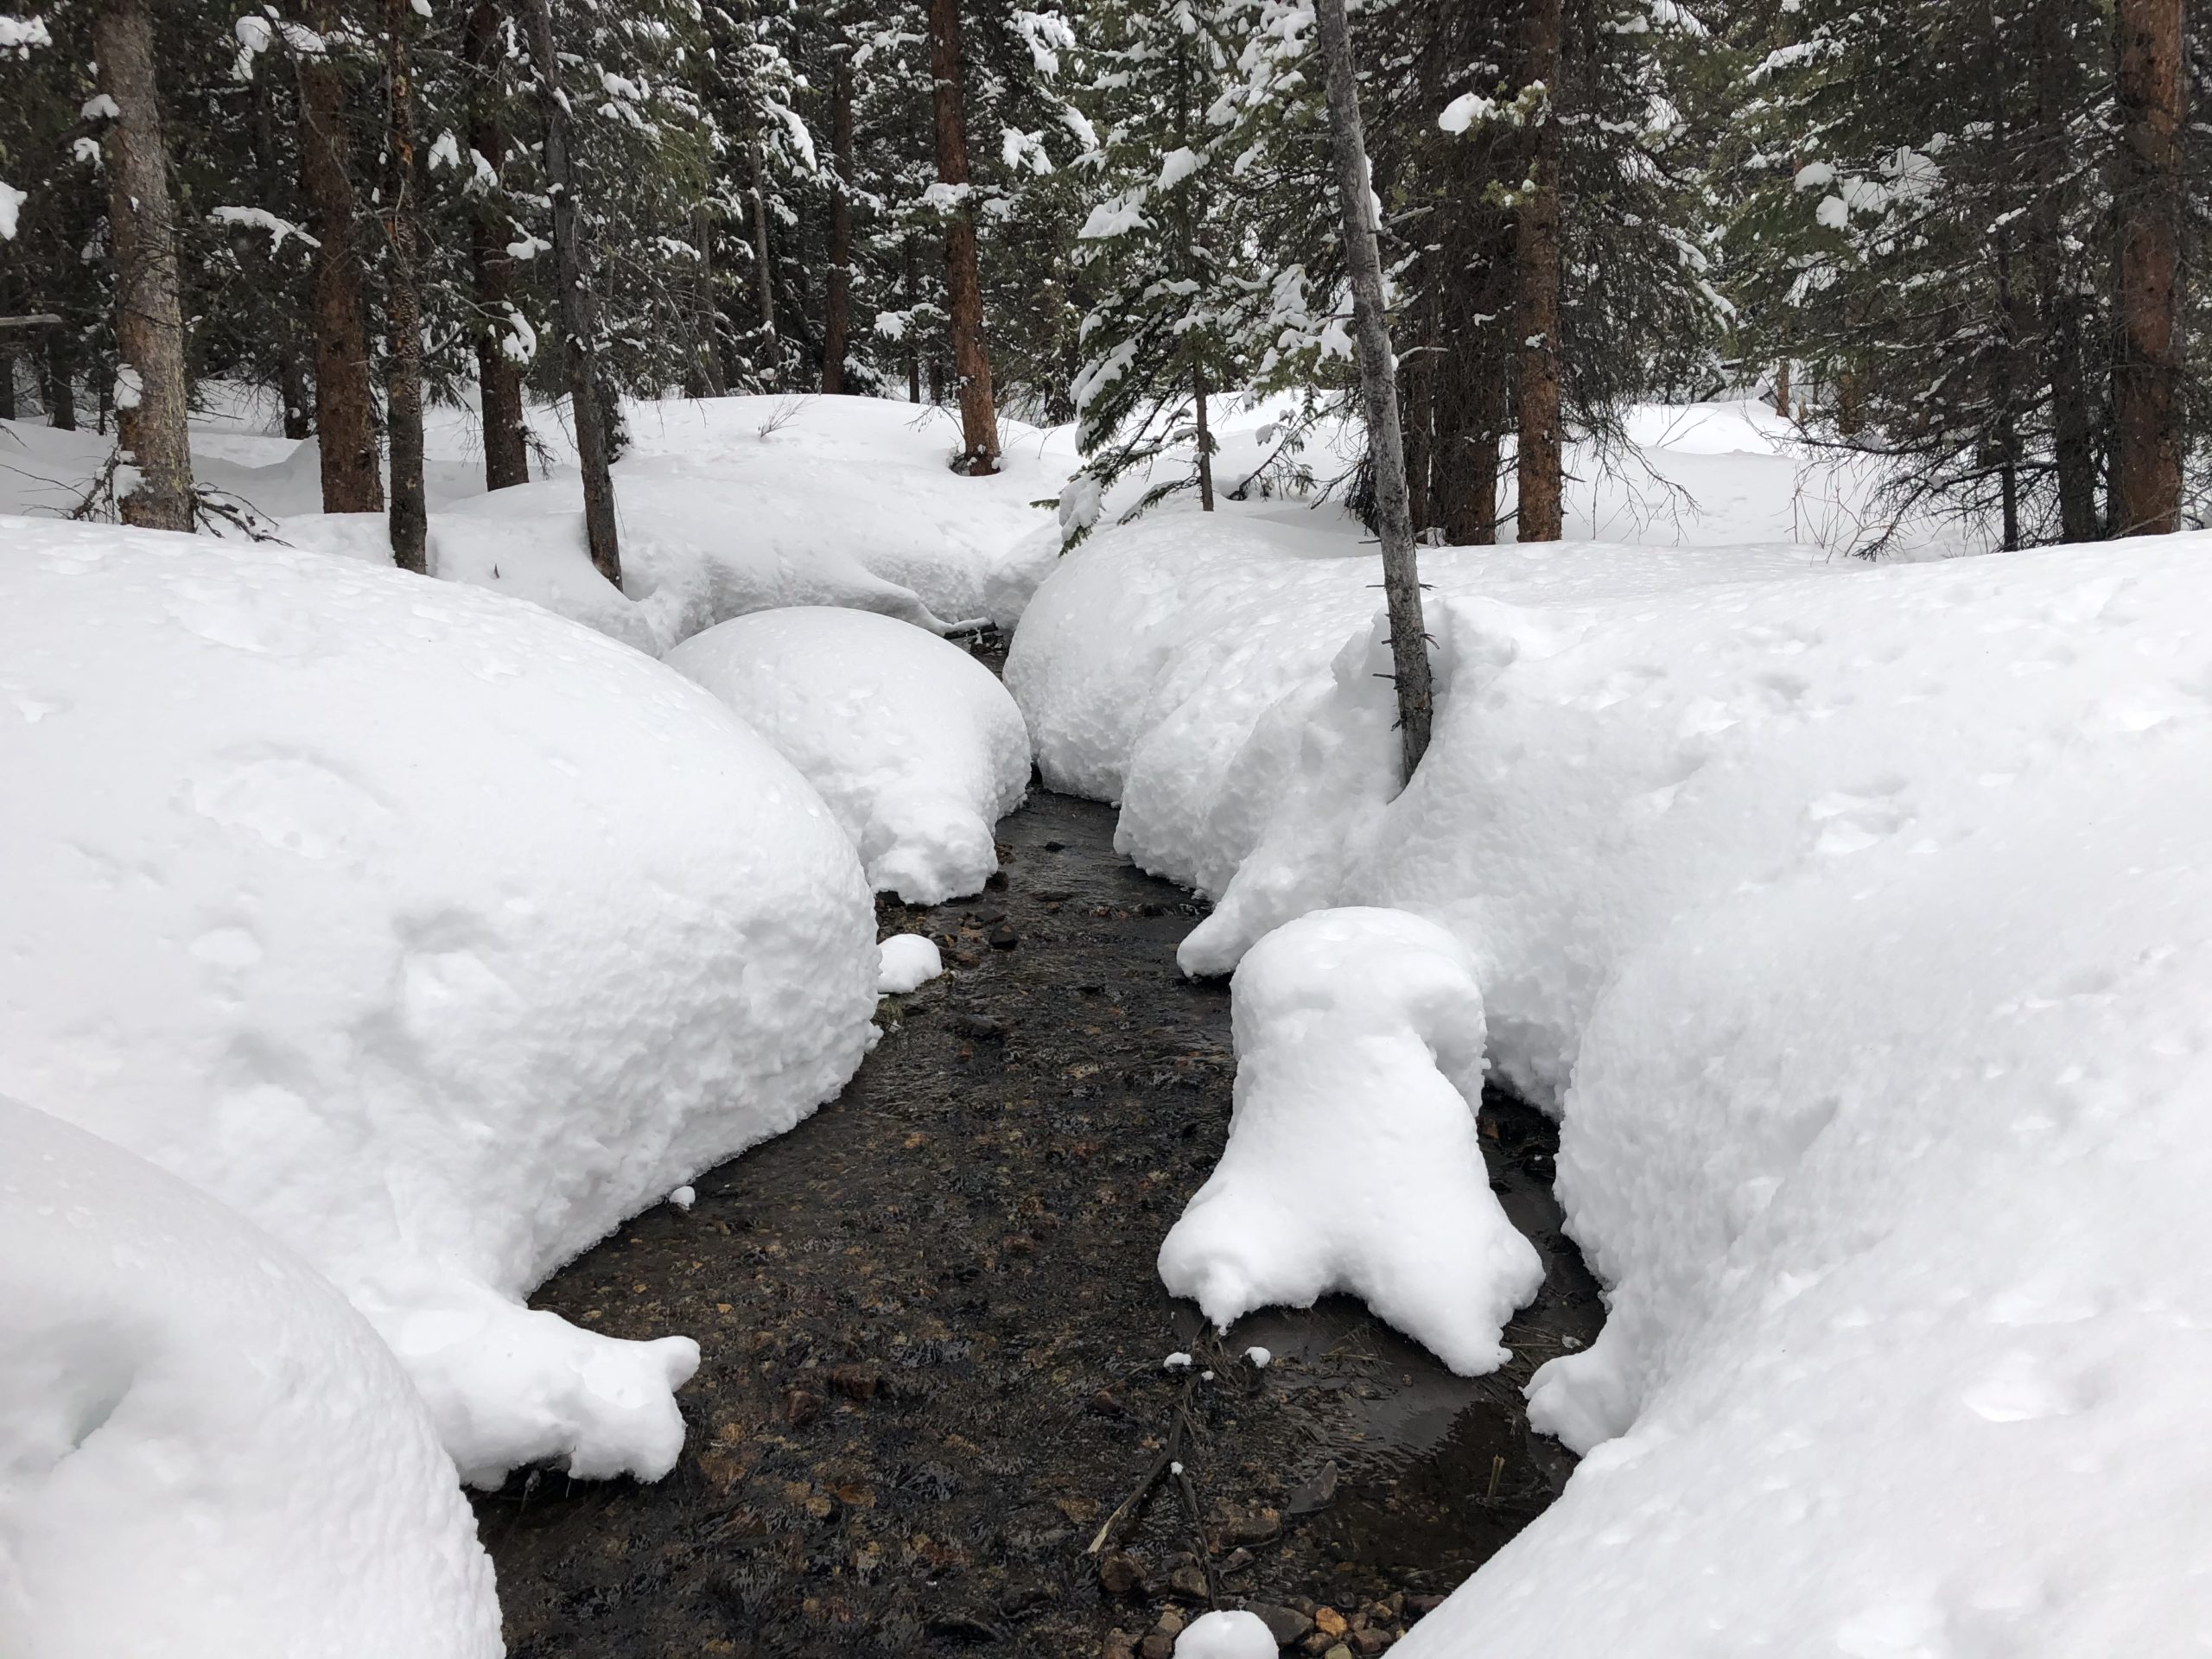 Snow piles up along the banks of Cucumber Gulch in Breckenridge on March 23, 2020. The snow will melt and flow into Dillon Reservoir. Photo credit: Denver Water.